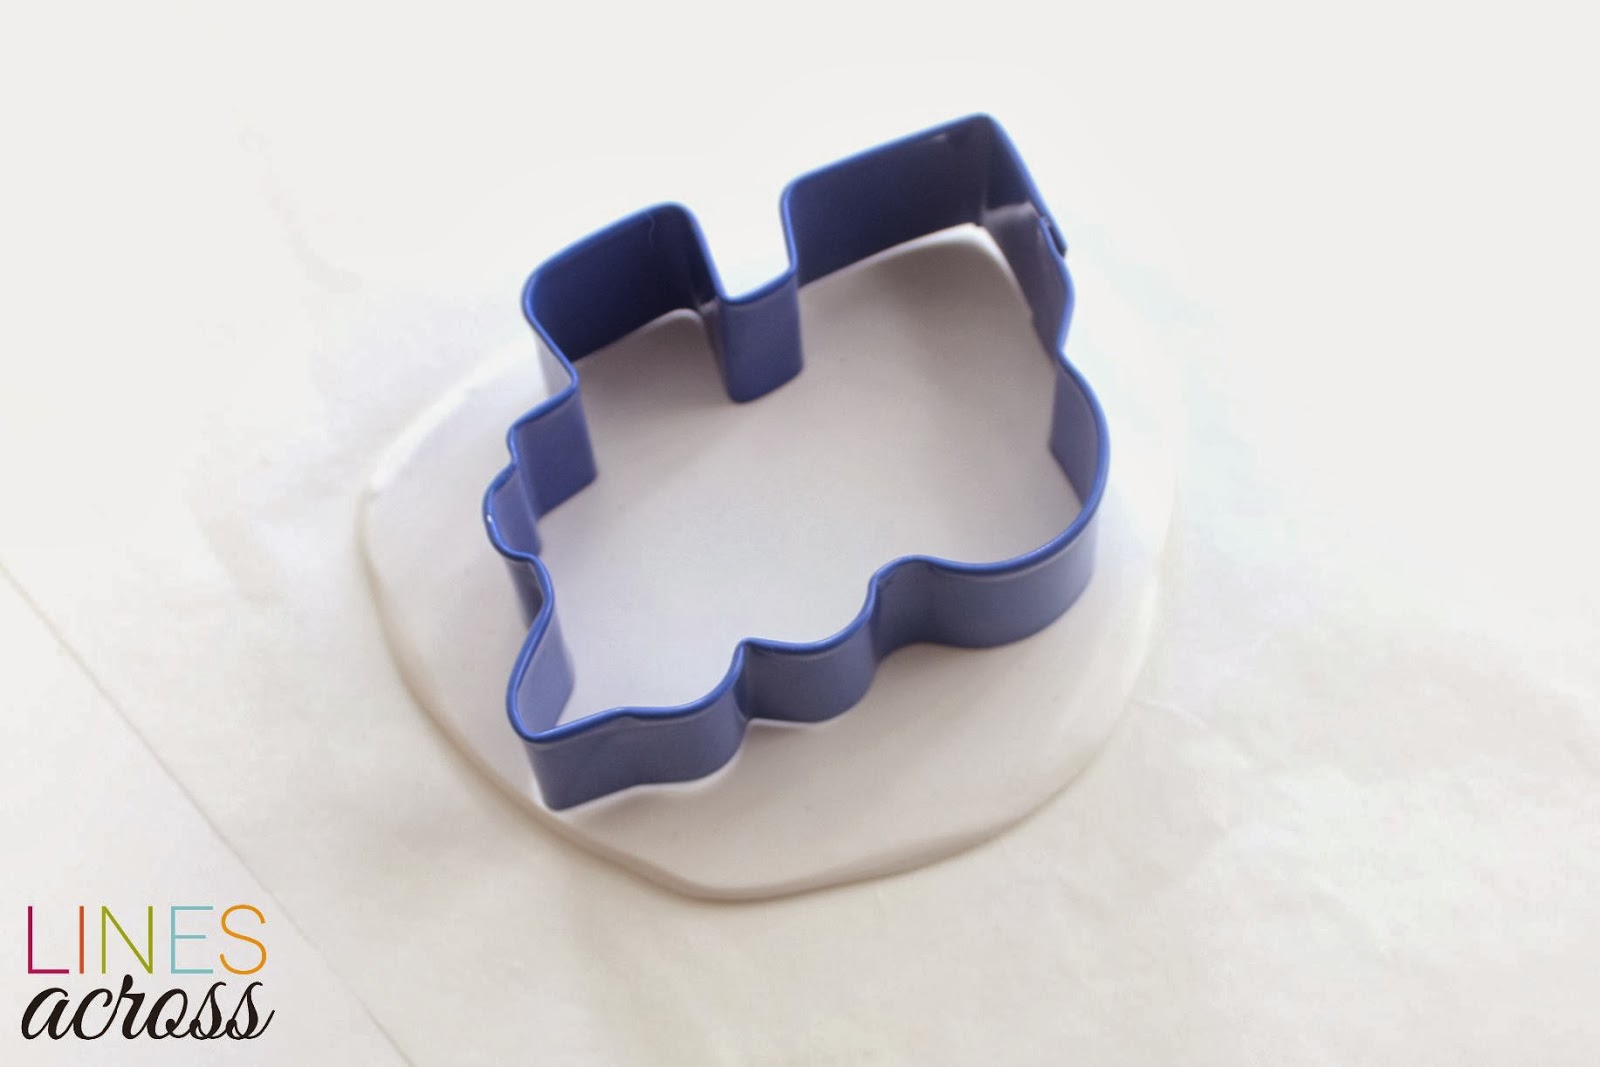 Details about   Nevada State Cookie Cutter Fondant Biscuit Baking Polymer Clay Jewelry Cutters 